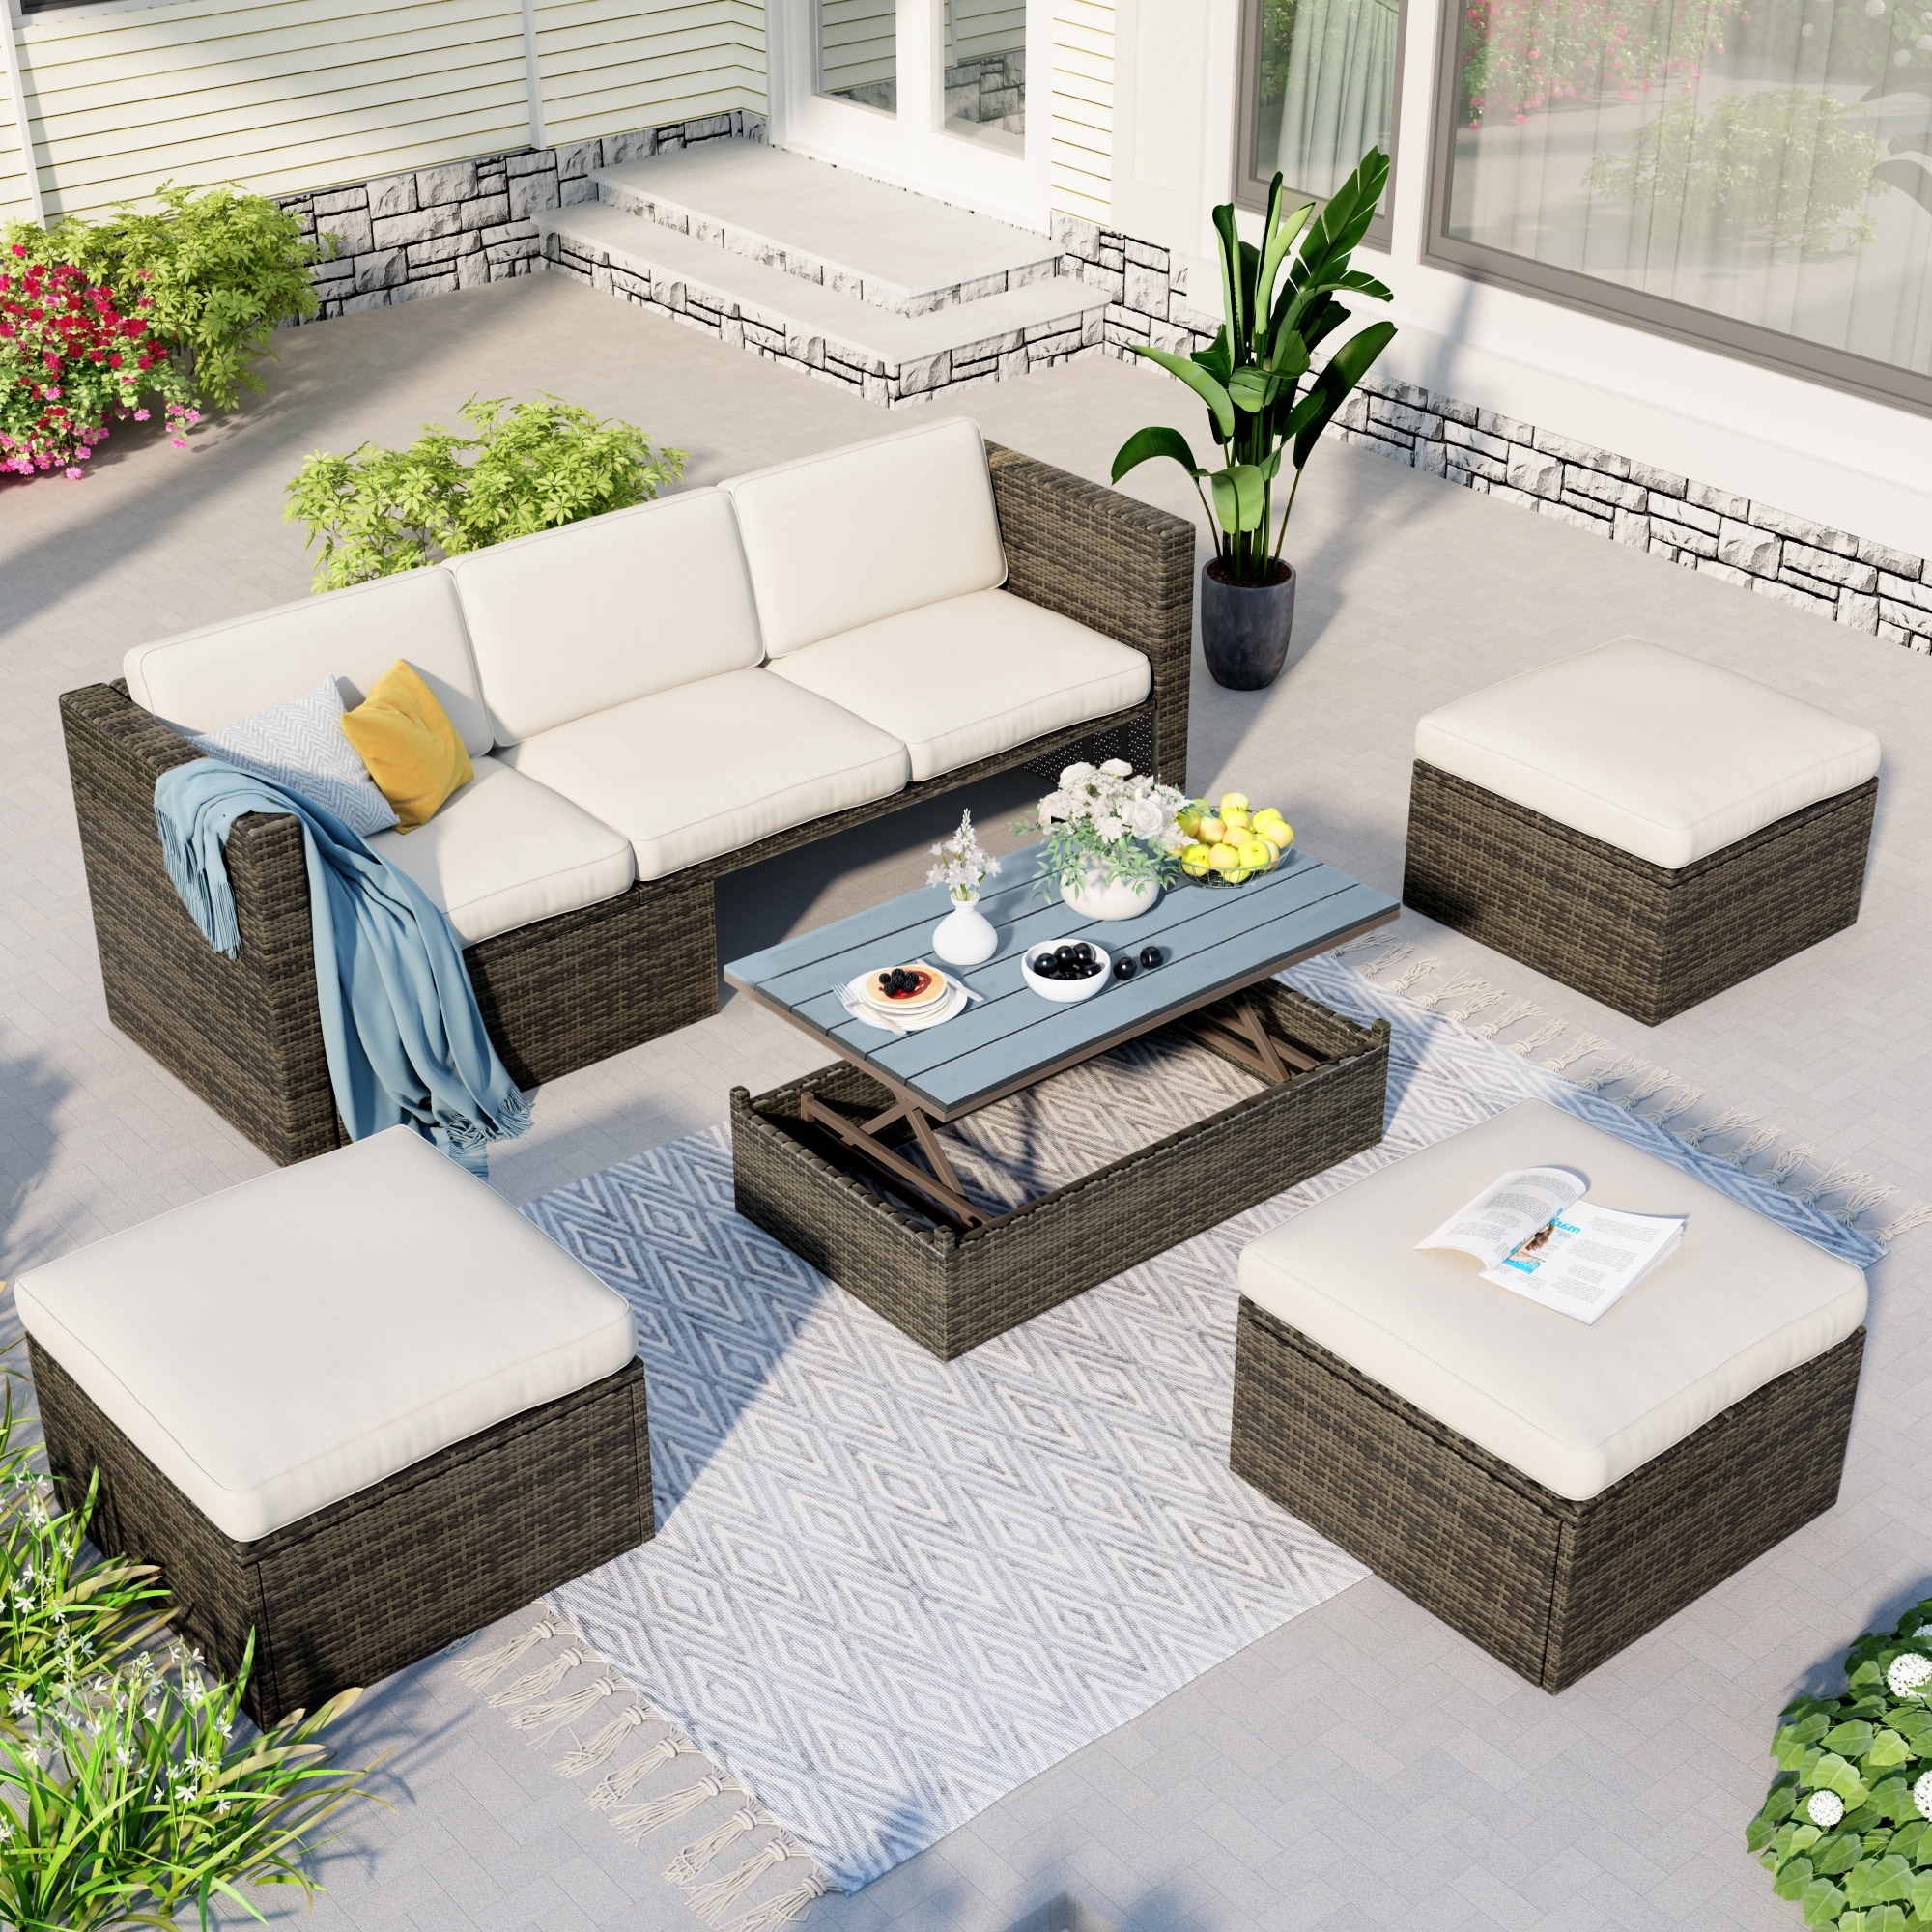 5-piece Rattan Multifunctional Outdoor Cushioned Sofa Set With Lift-tabletop Coffee Table And Adustable Backrest